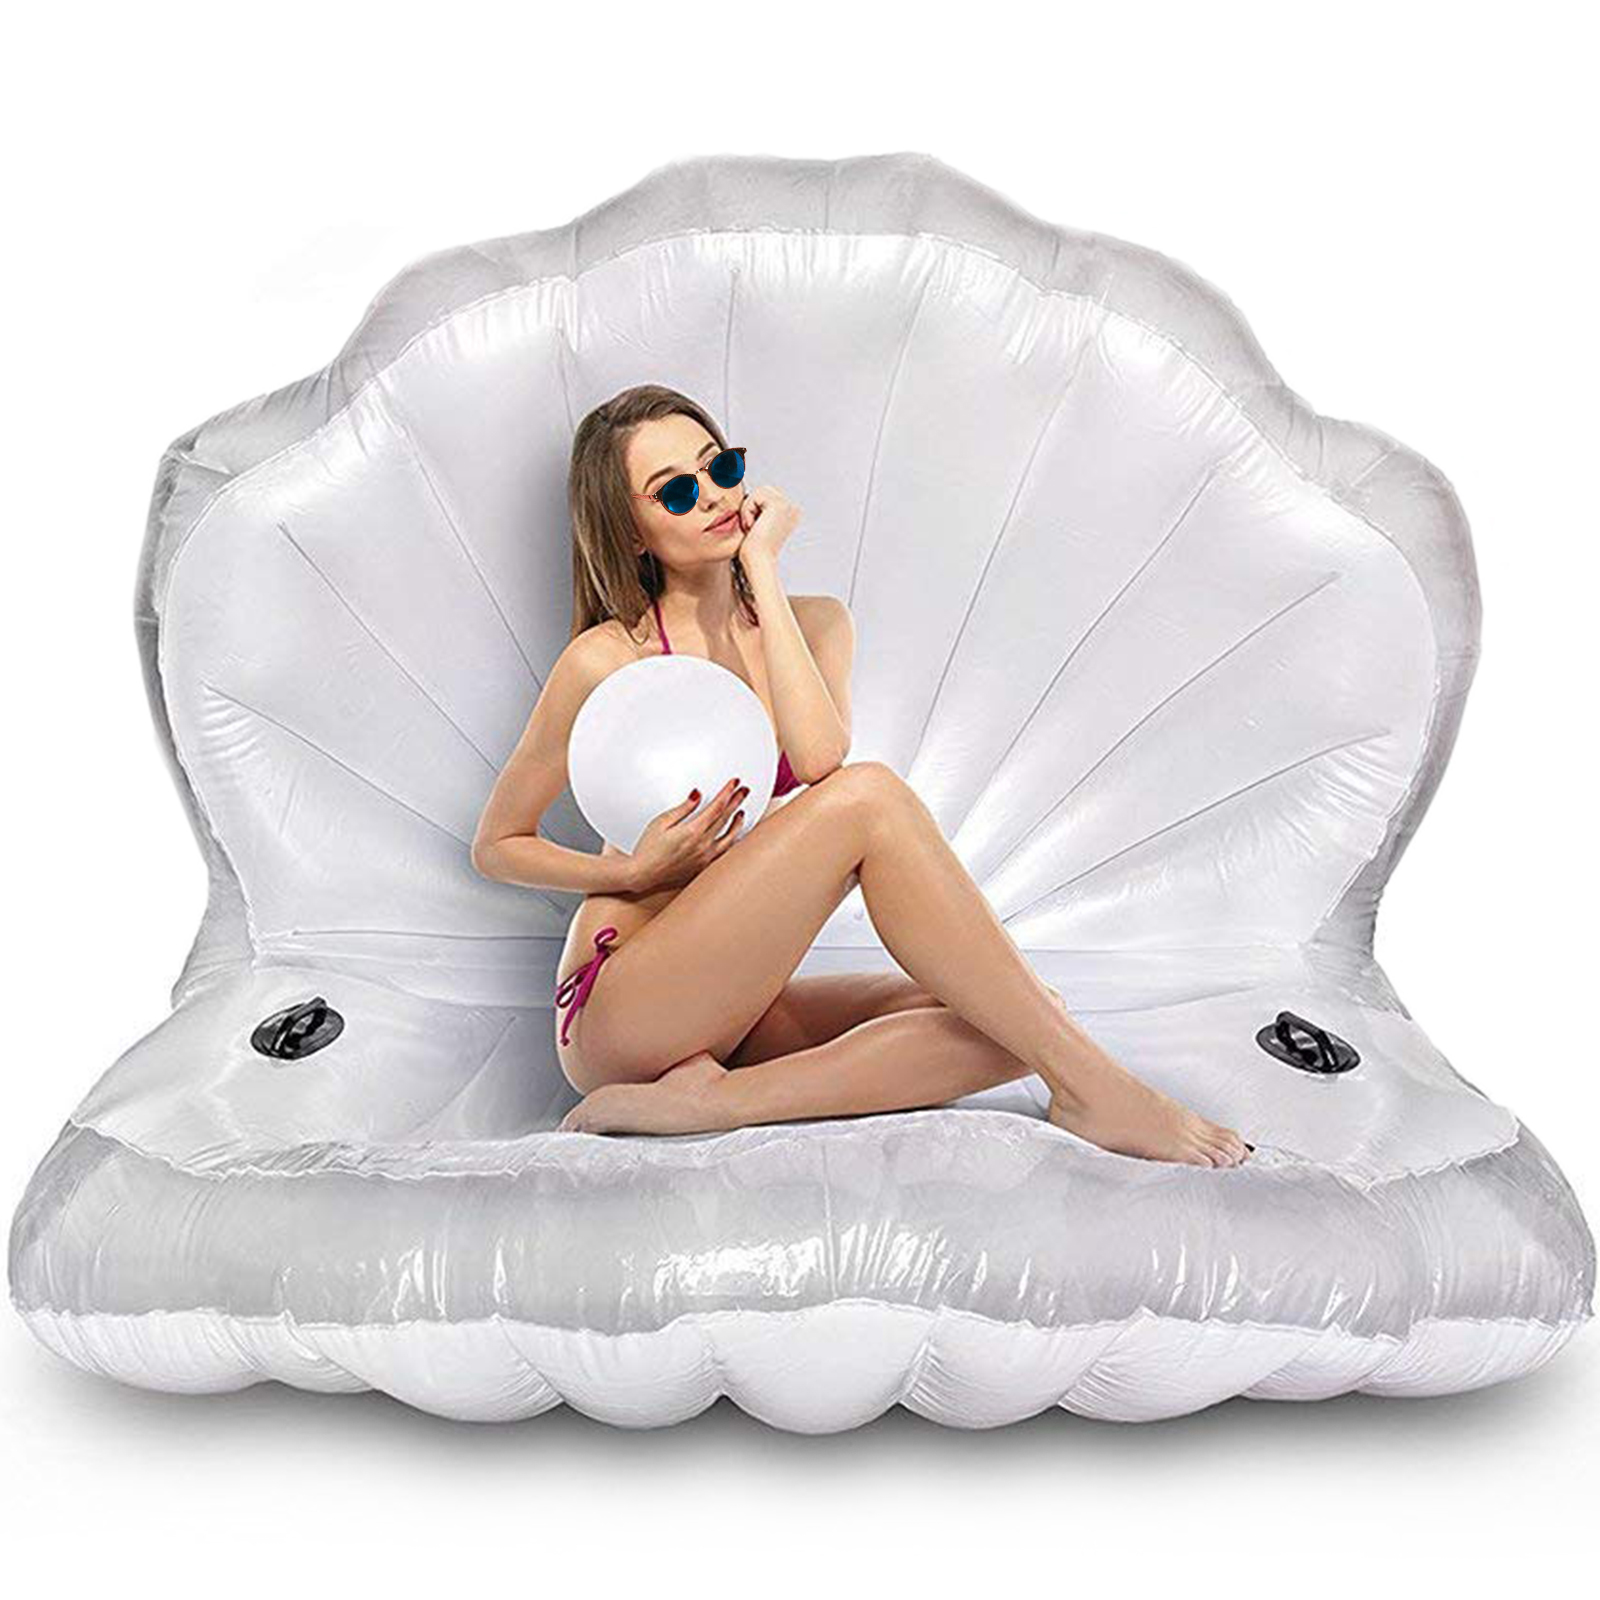 Inflatable Seashell 550LB Giant Swimming Pool Float W/Pump Lounger Pool Lake от Vevor Many GEOs